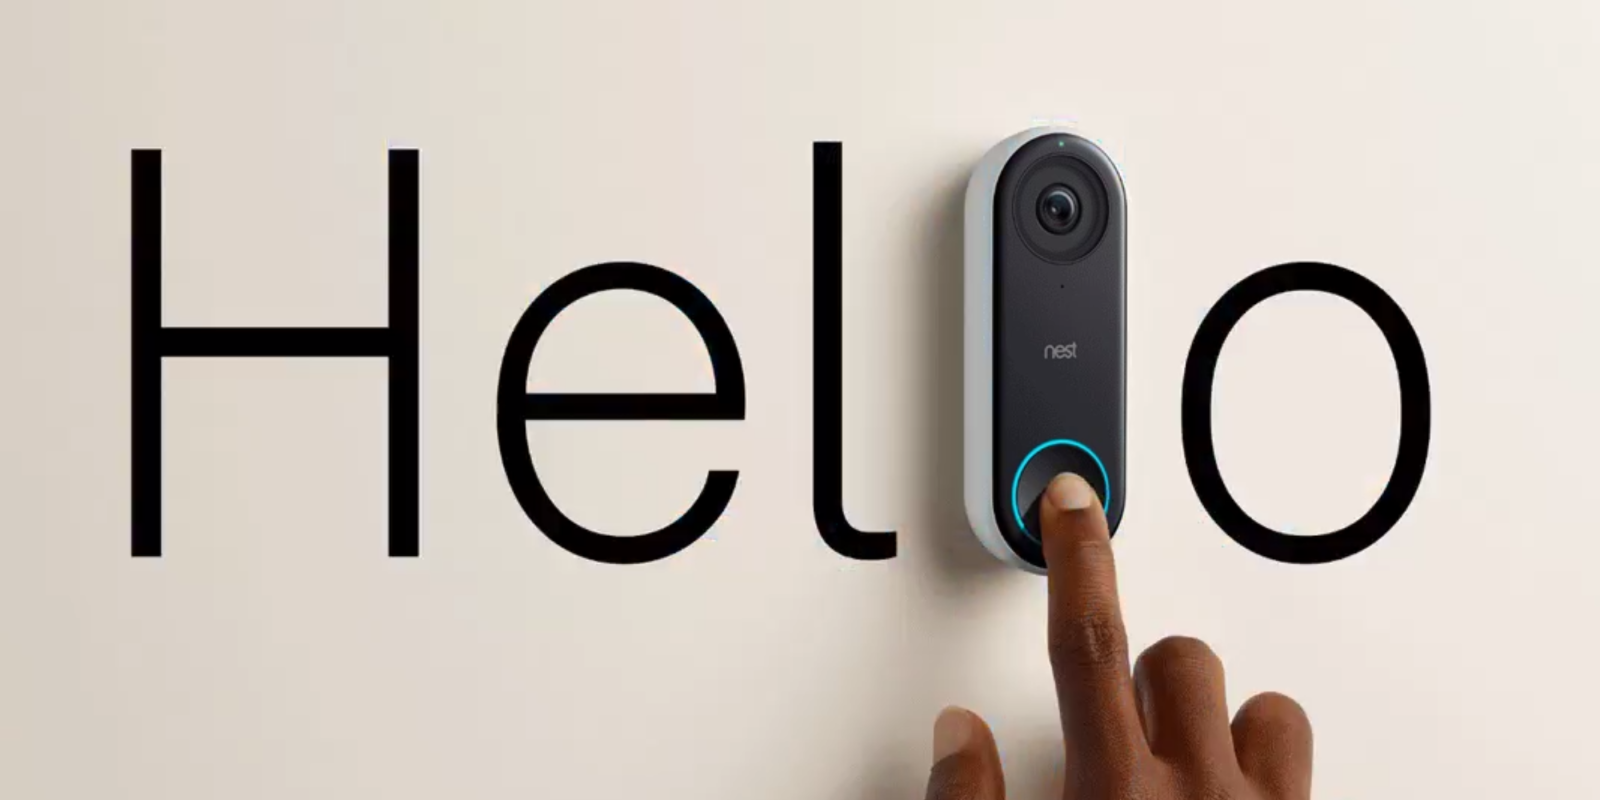 nest-on-twitter-know-who_s-knocking-introducing-the-nest-hello-video-doorbell-coming-early-2018-nestsecurity-nestevent-he280a6-2017-09-20-09-36-57